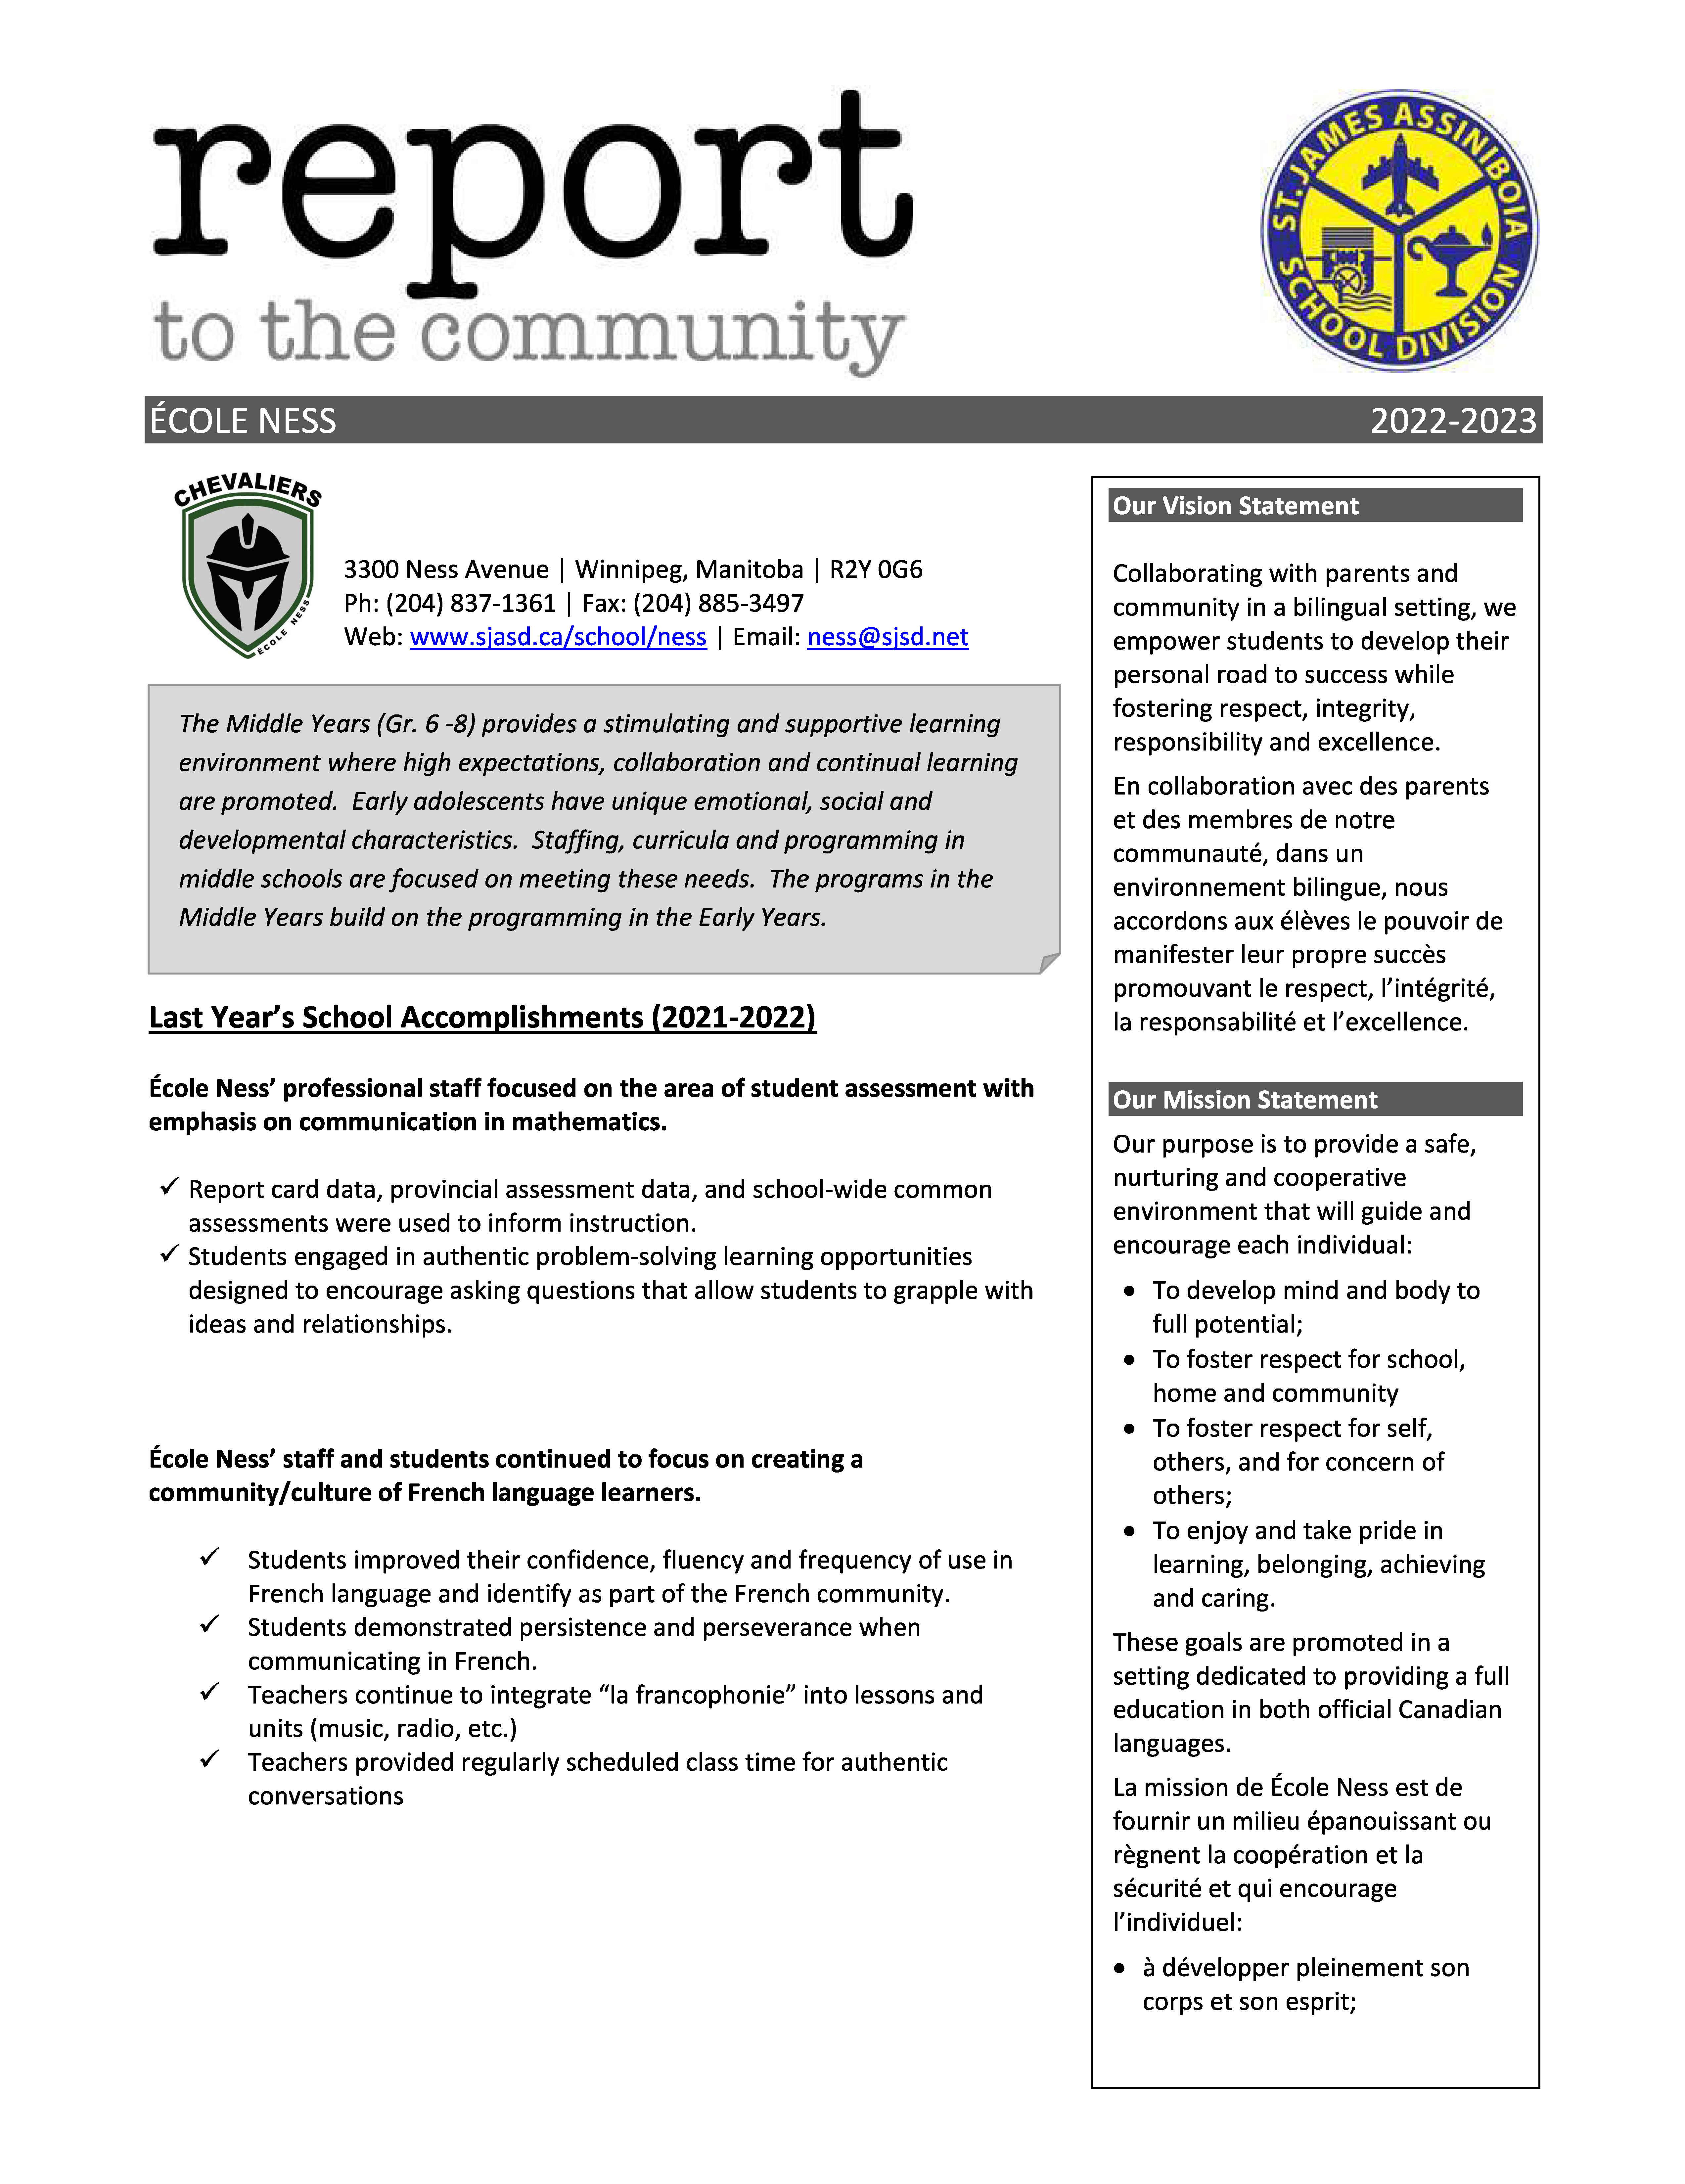 Ness_Report_the_Community_2022-23_Page_1.png